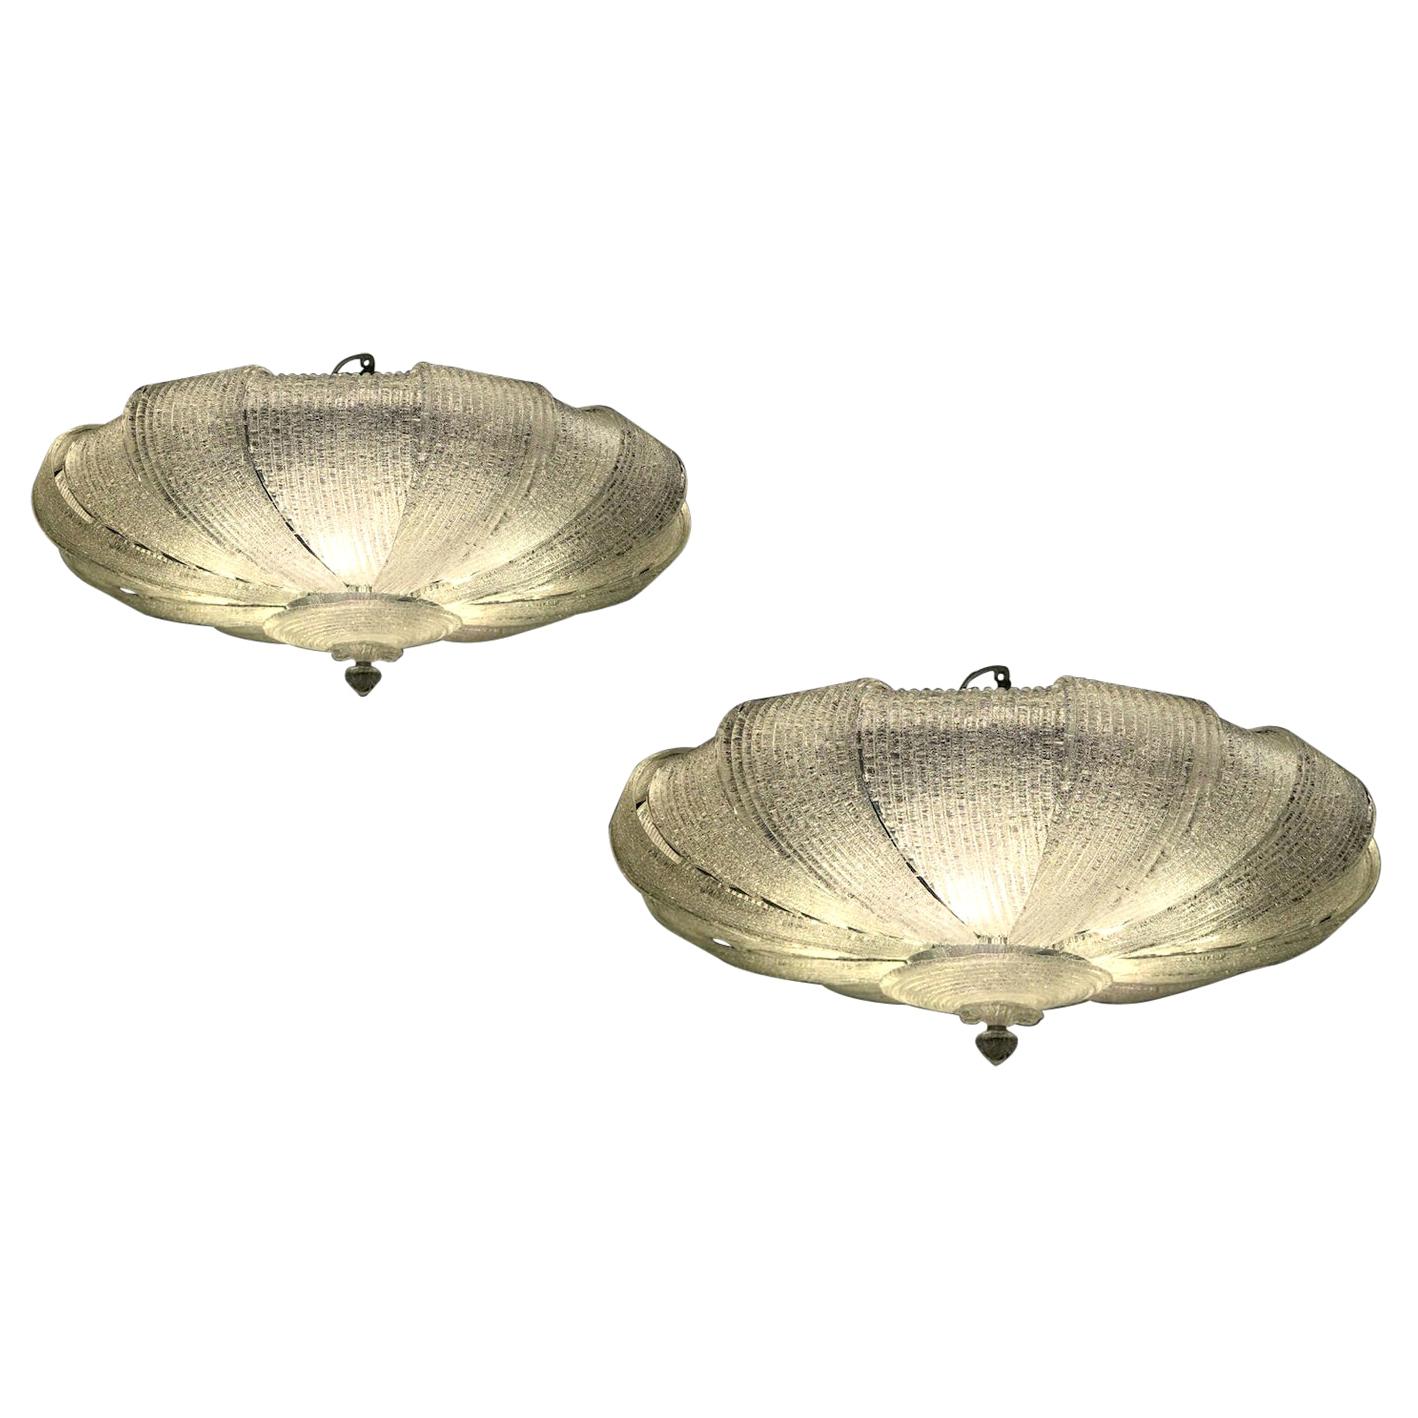 Pair of Italian Murano glass leaves modern ceiling lights. 
Exclusive production with precious Murano glass leaves.
 Available with clear and amber glass. 
Six E 27 light bulbs. We can wire for your country standards.
 